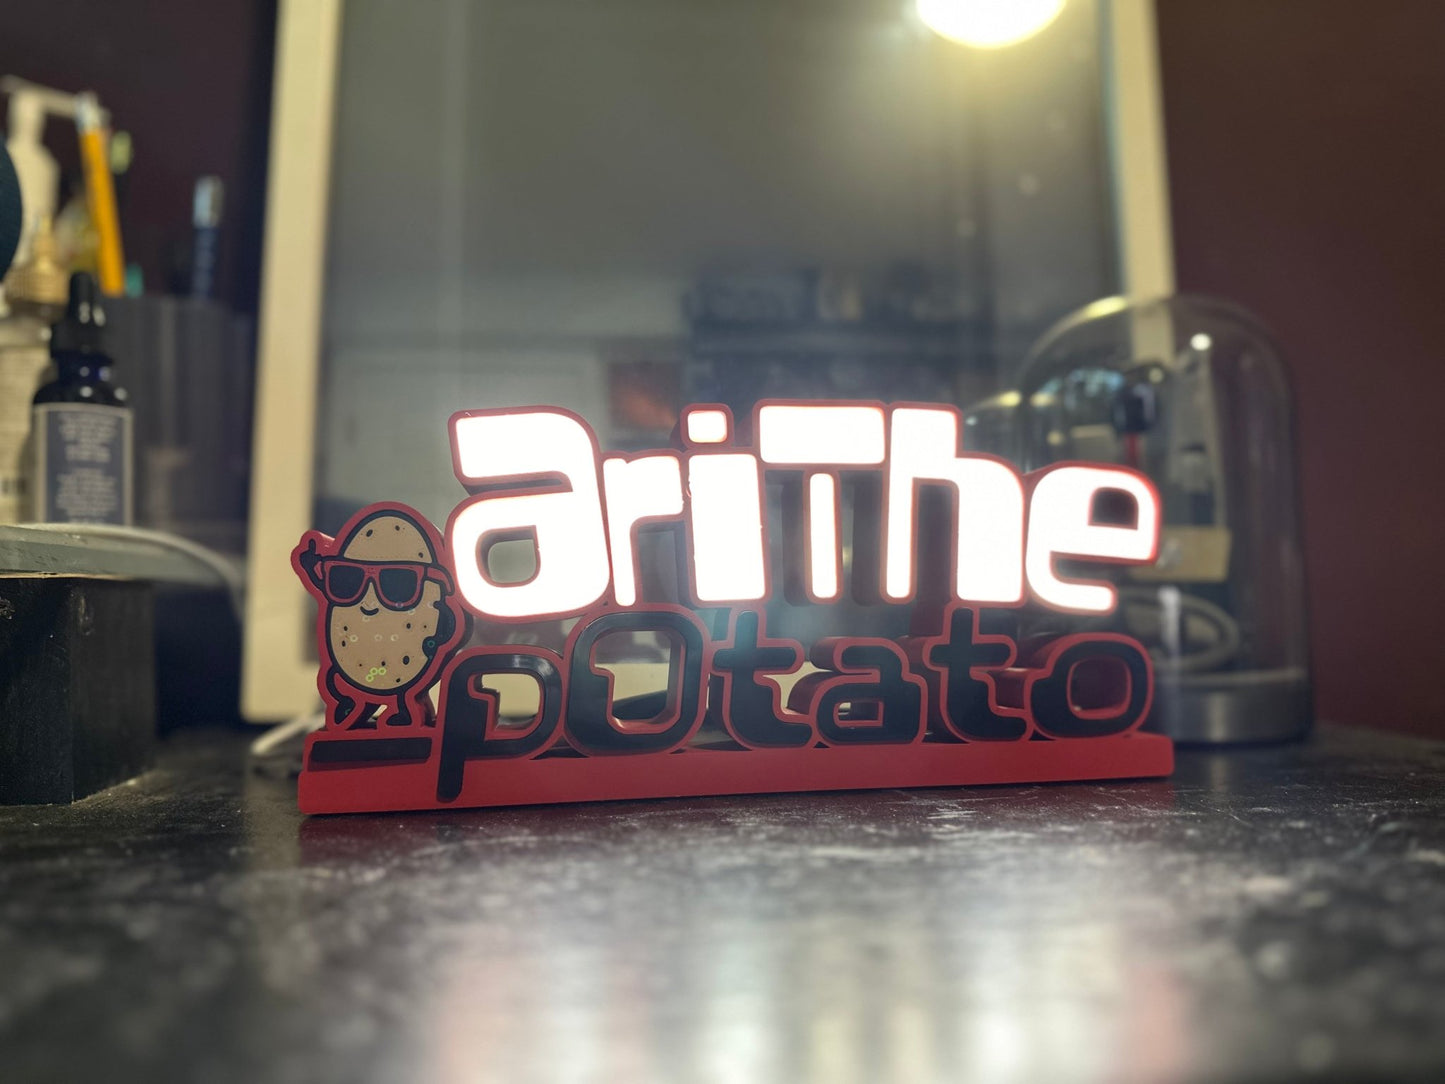 Custom Name Lamps - Personalized Nightstand Lights for Every Space - RudeGrain3d Printed led Lit Sign